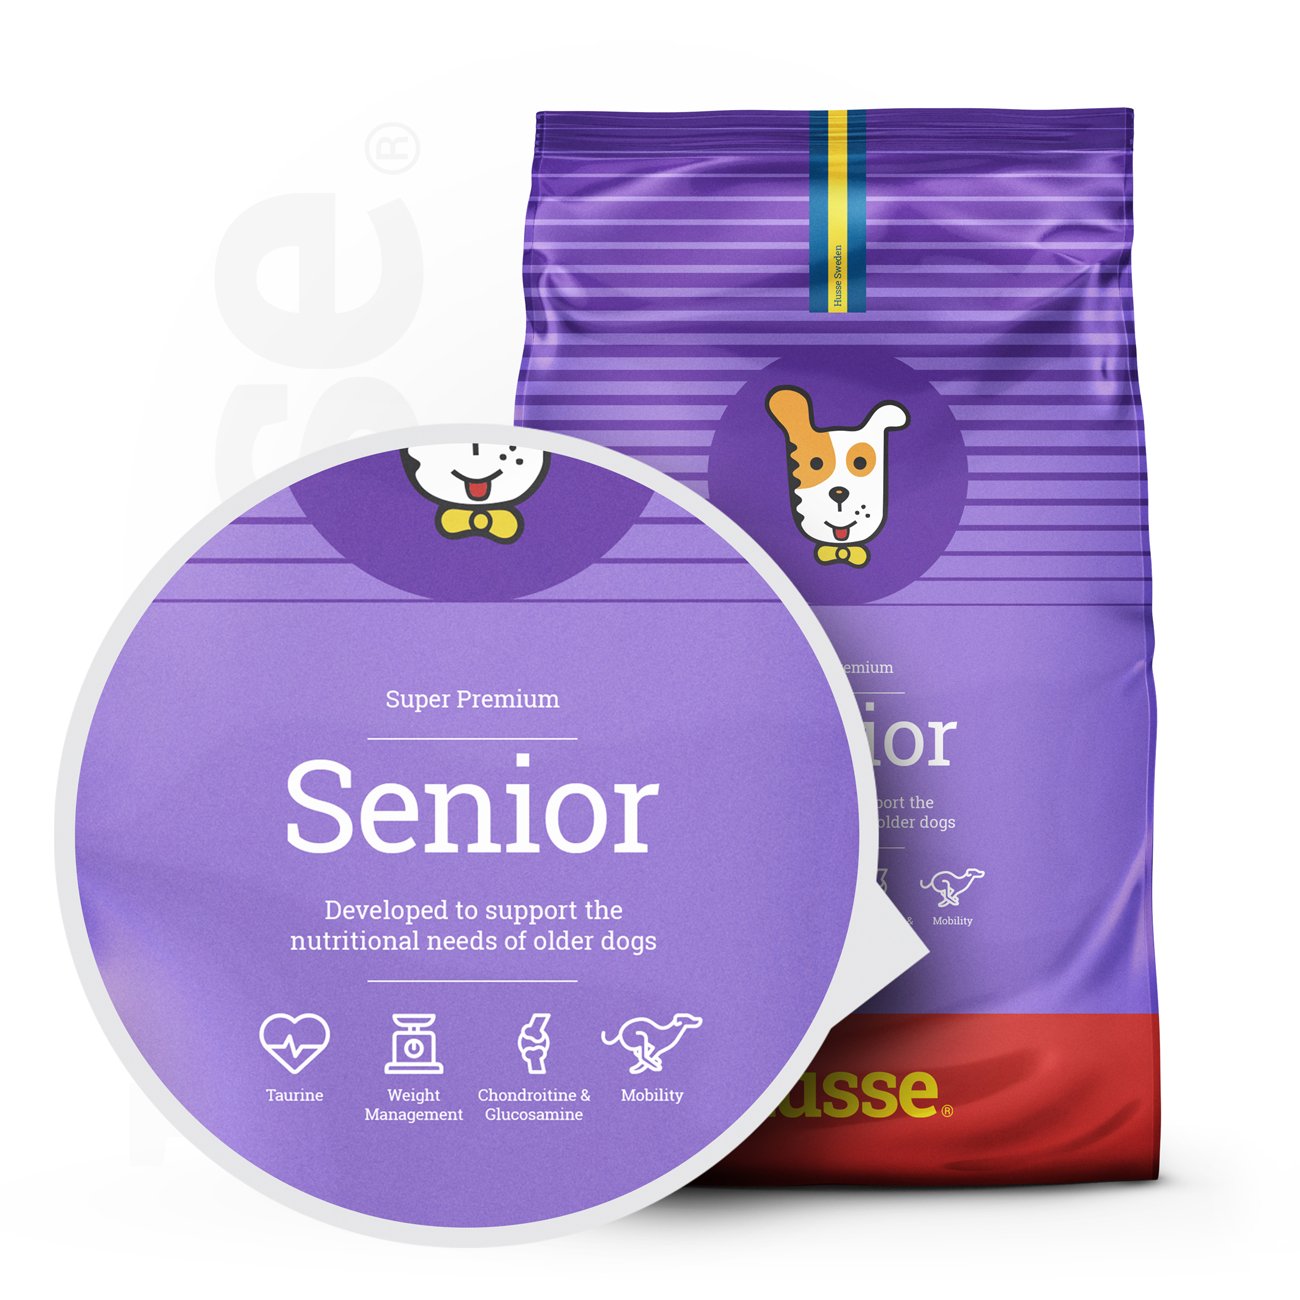 Dogs’ nutritional needs. Complete with natural senior